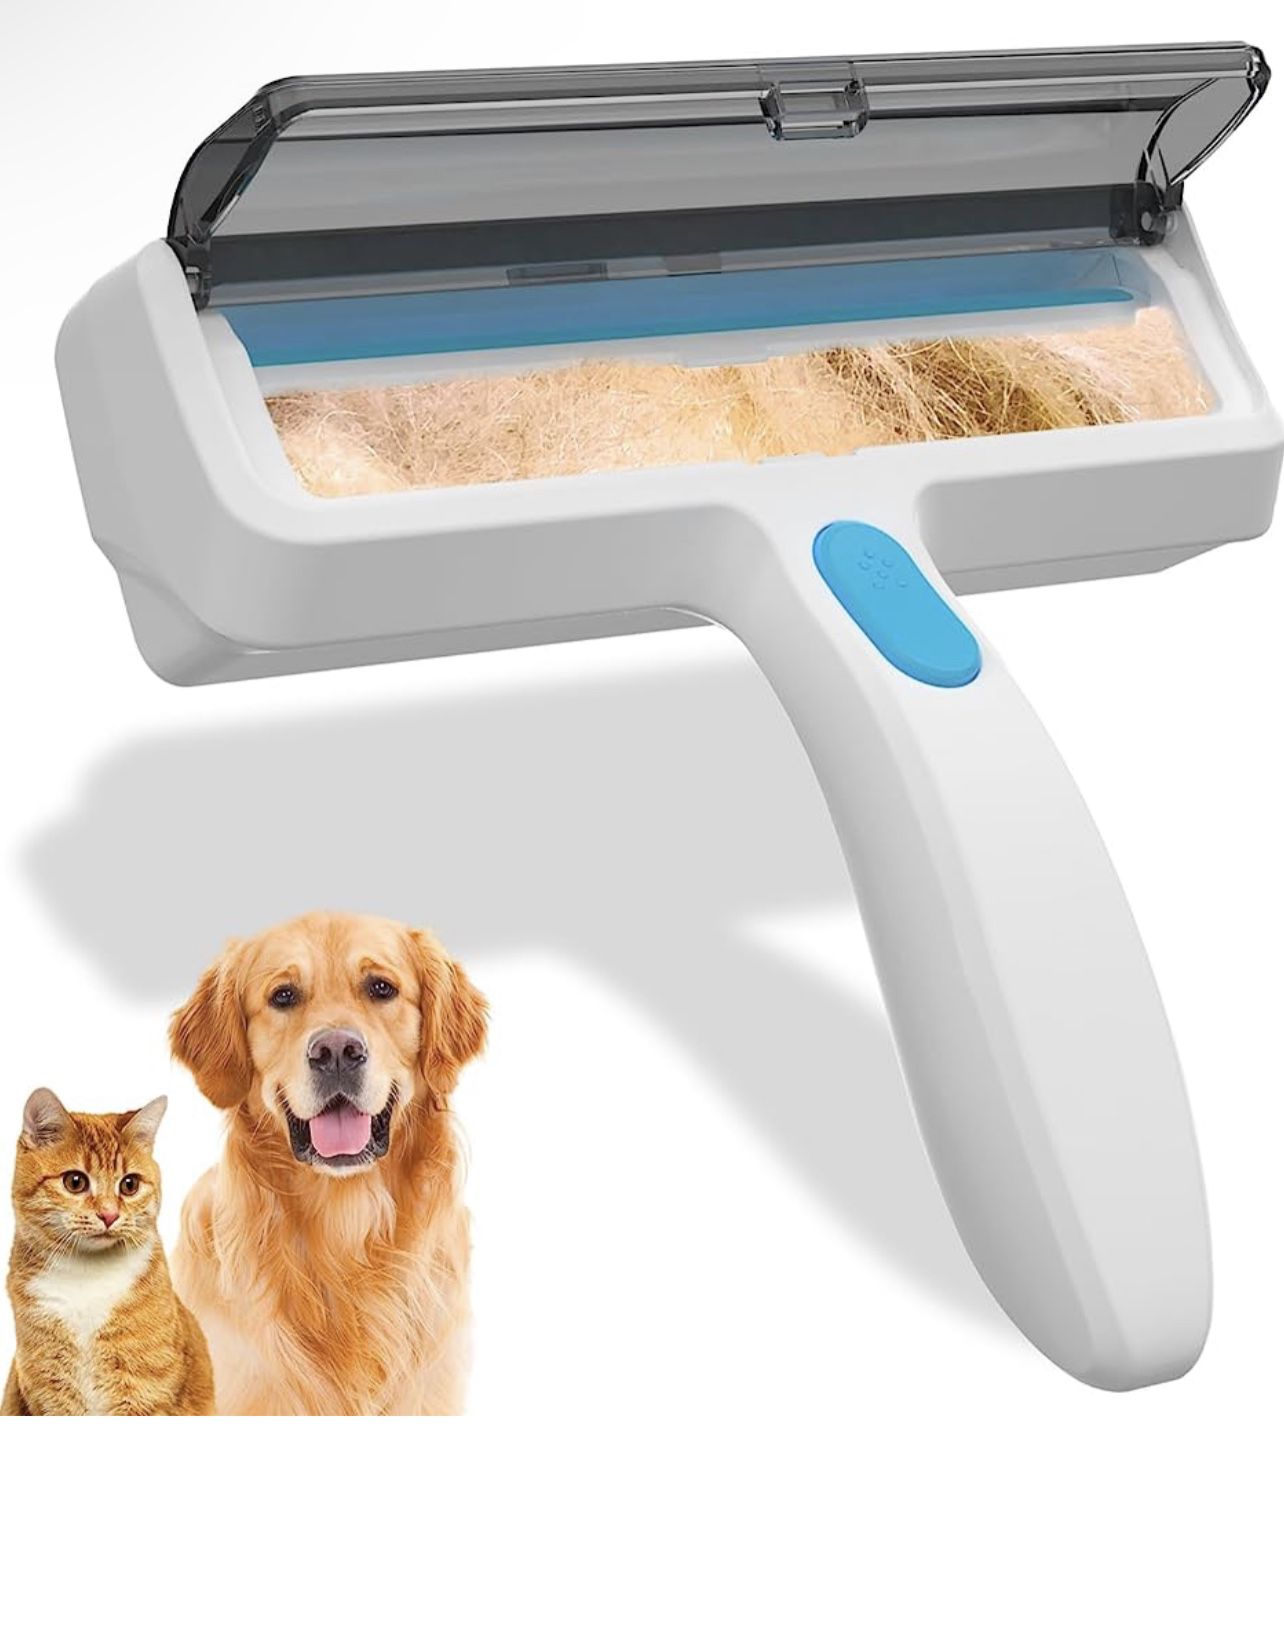 Pet Hair Remover Roller - Lint Roller for Pet Hair, Reusable Cat & Dog Hair Remover for Furniture, Couch, Bed, Car Seat, Carpet